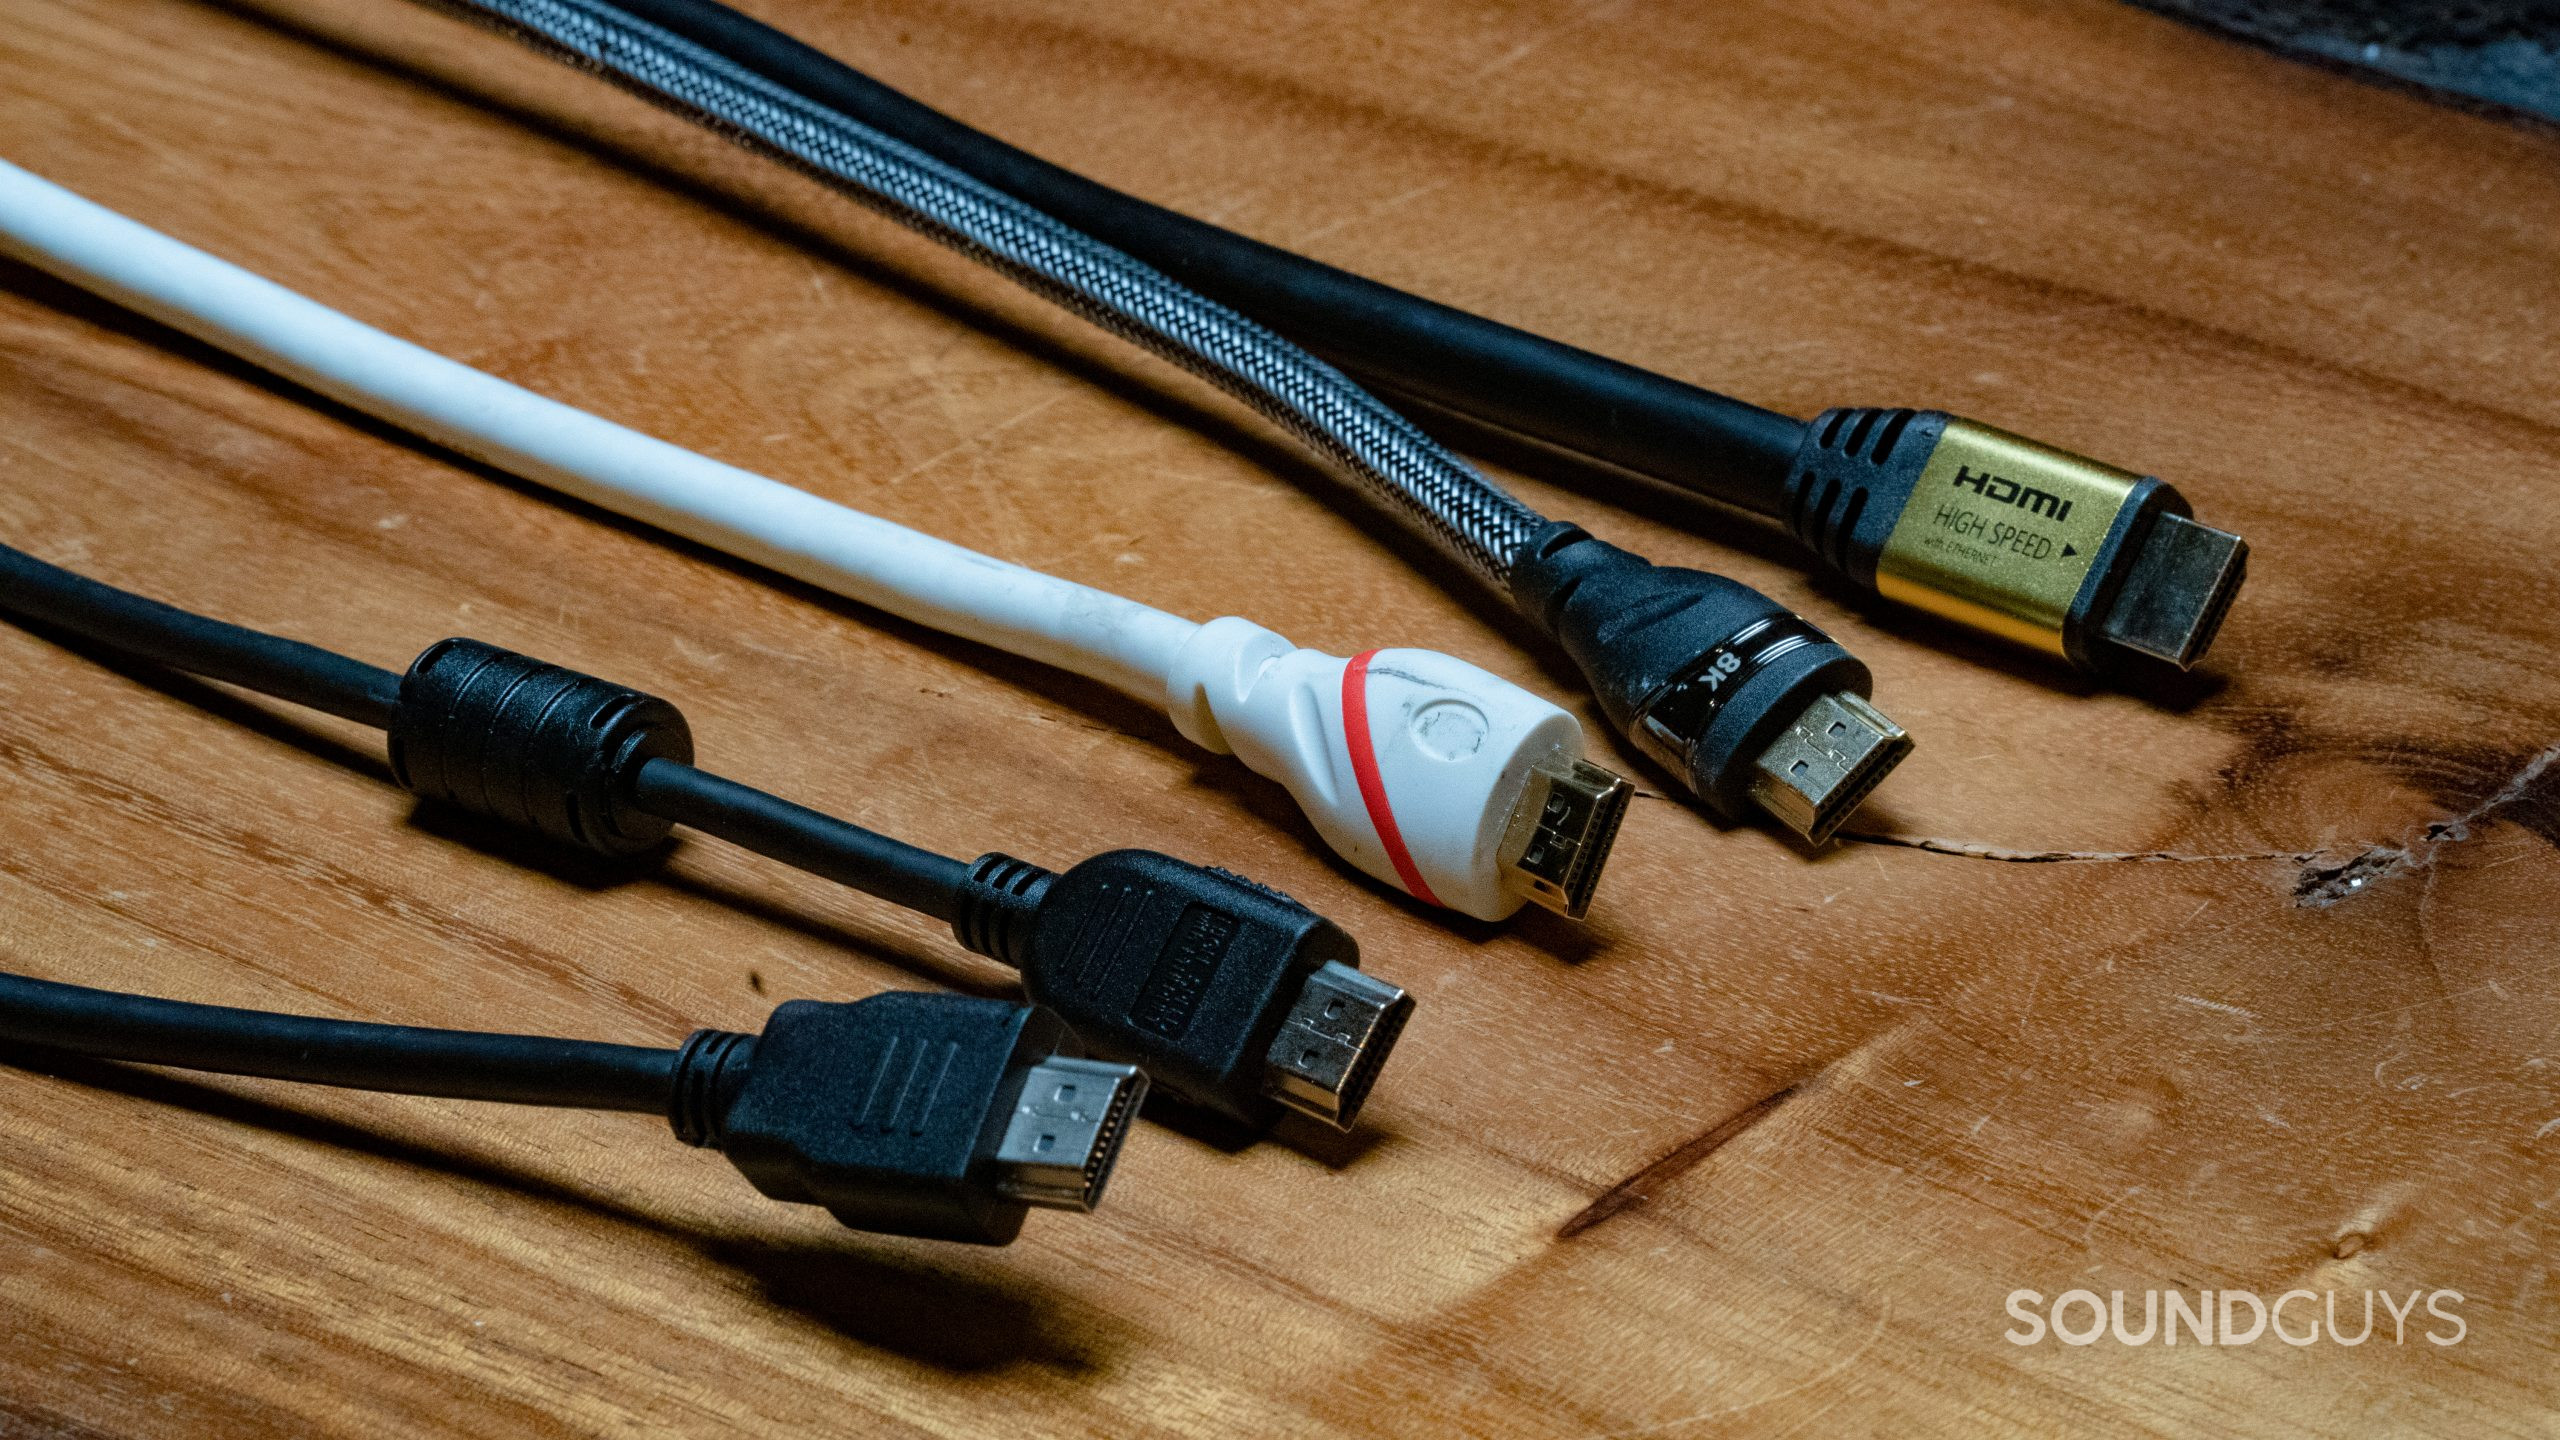 An assortment of 5 different HDMI cables showing the connector at the end of each.